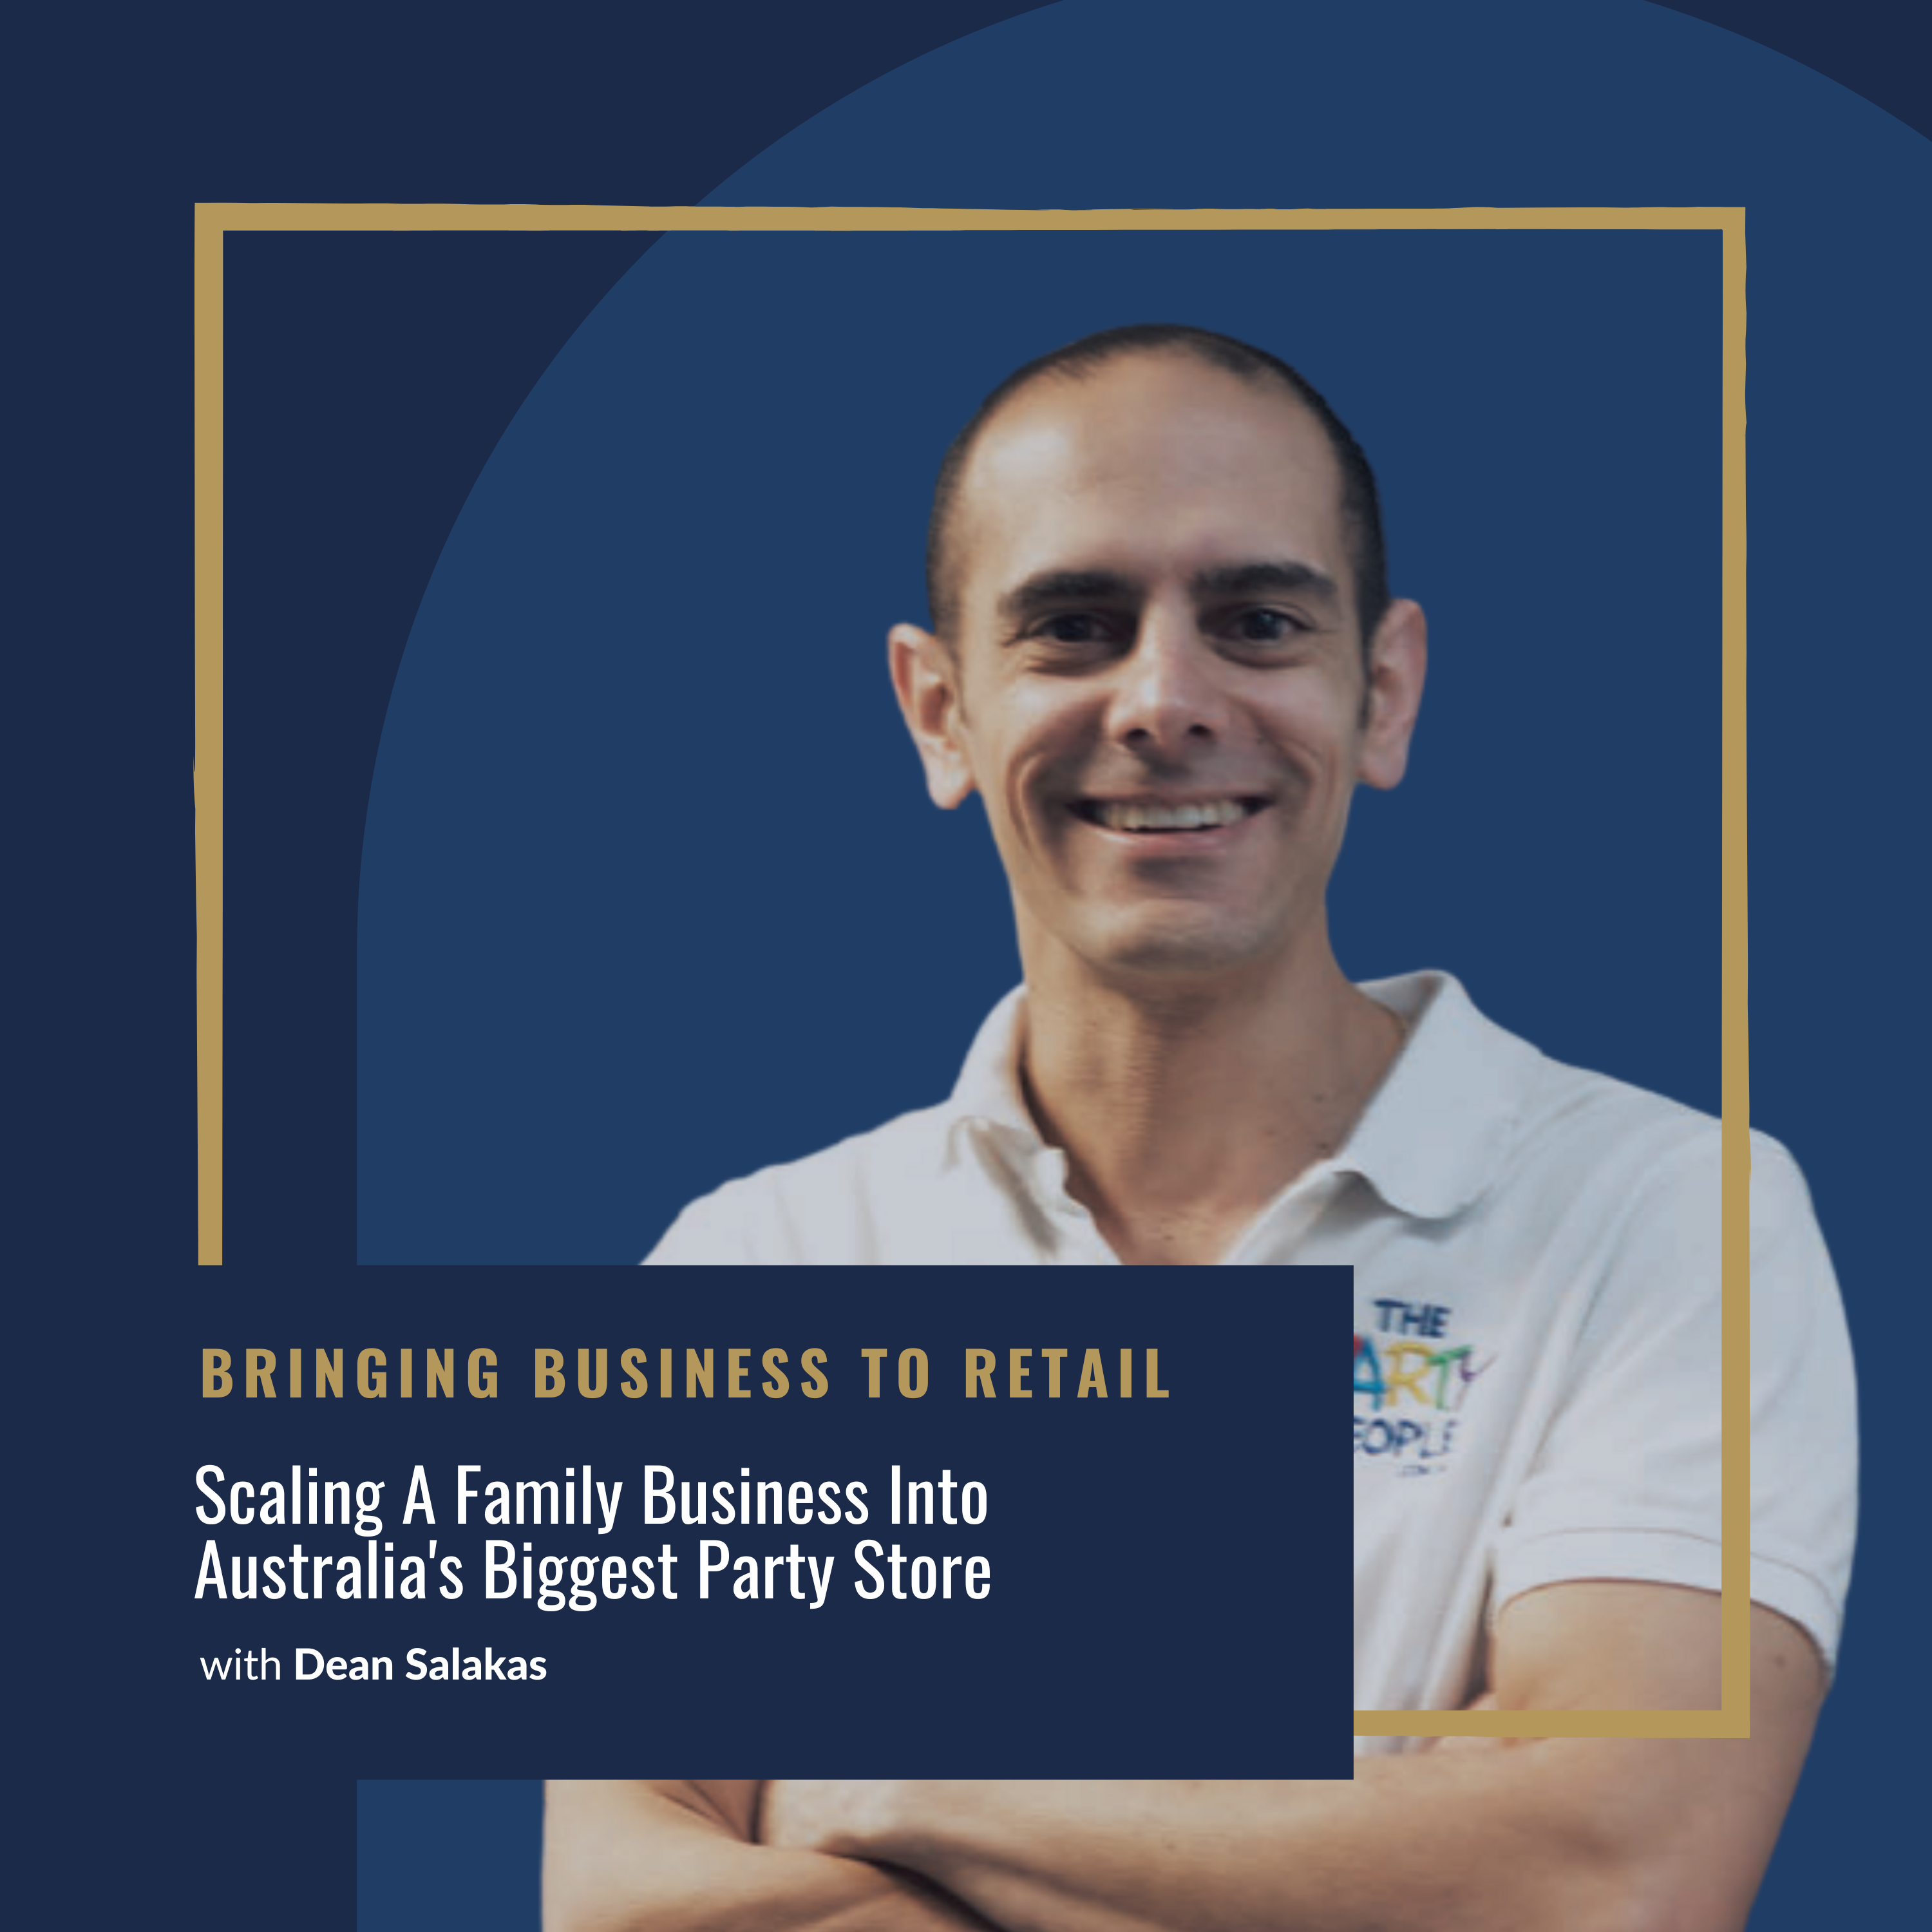 DeanSalakas-Scaling A Family Business Into Australia’s Biggest Party Store-wordpress